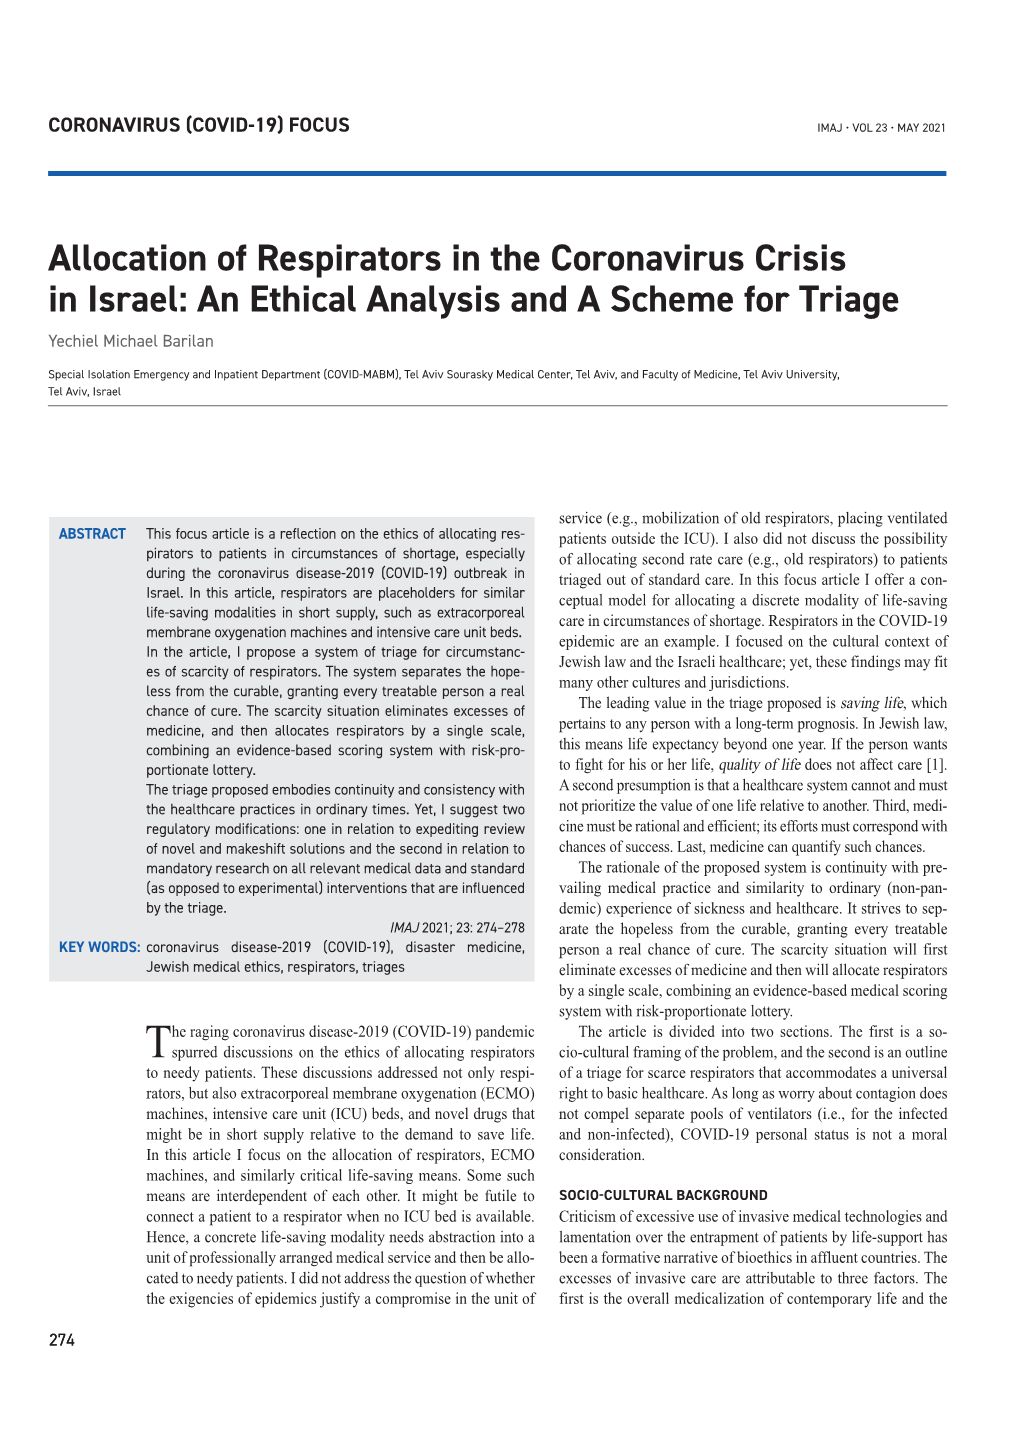 Allocation of Respirators in the Coronavirus Crisis in Israel: an Ethical Analysis and a Scheme for Triage Yechiel Michael Barilan